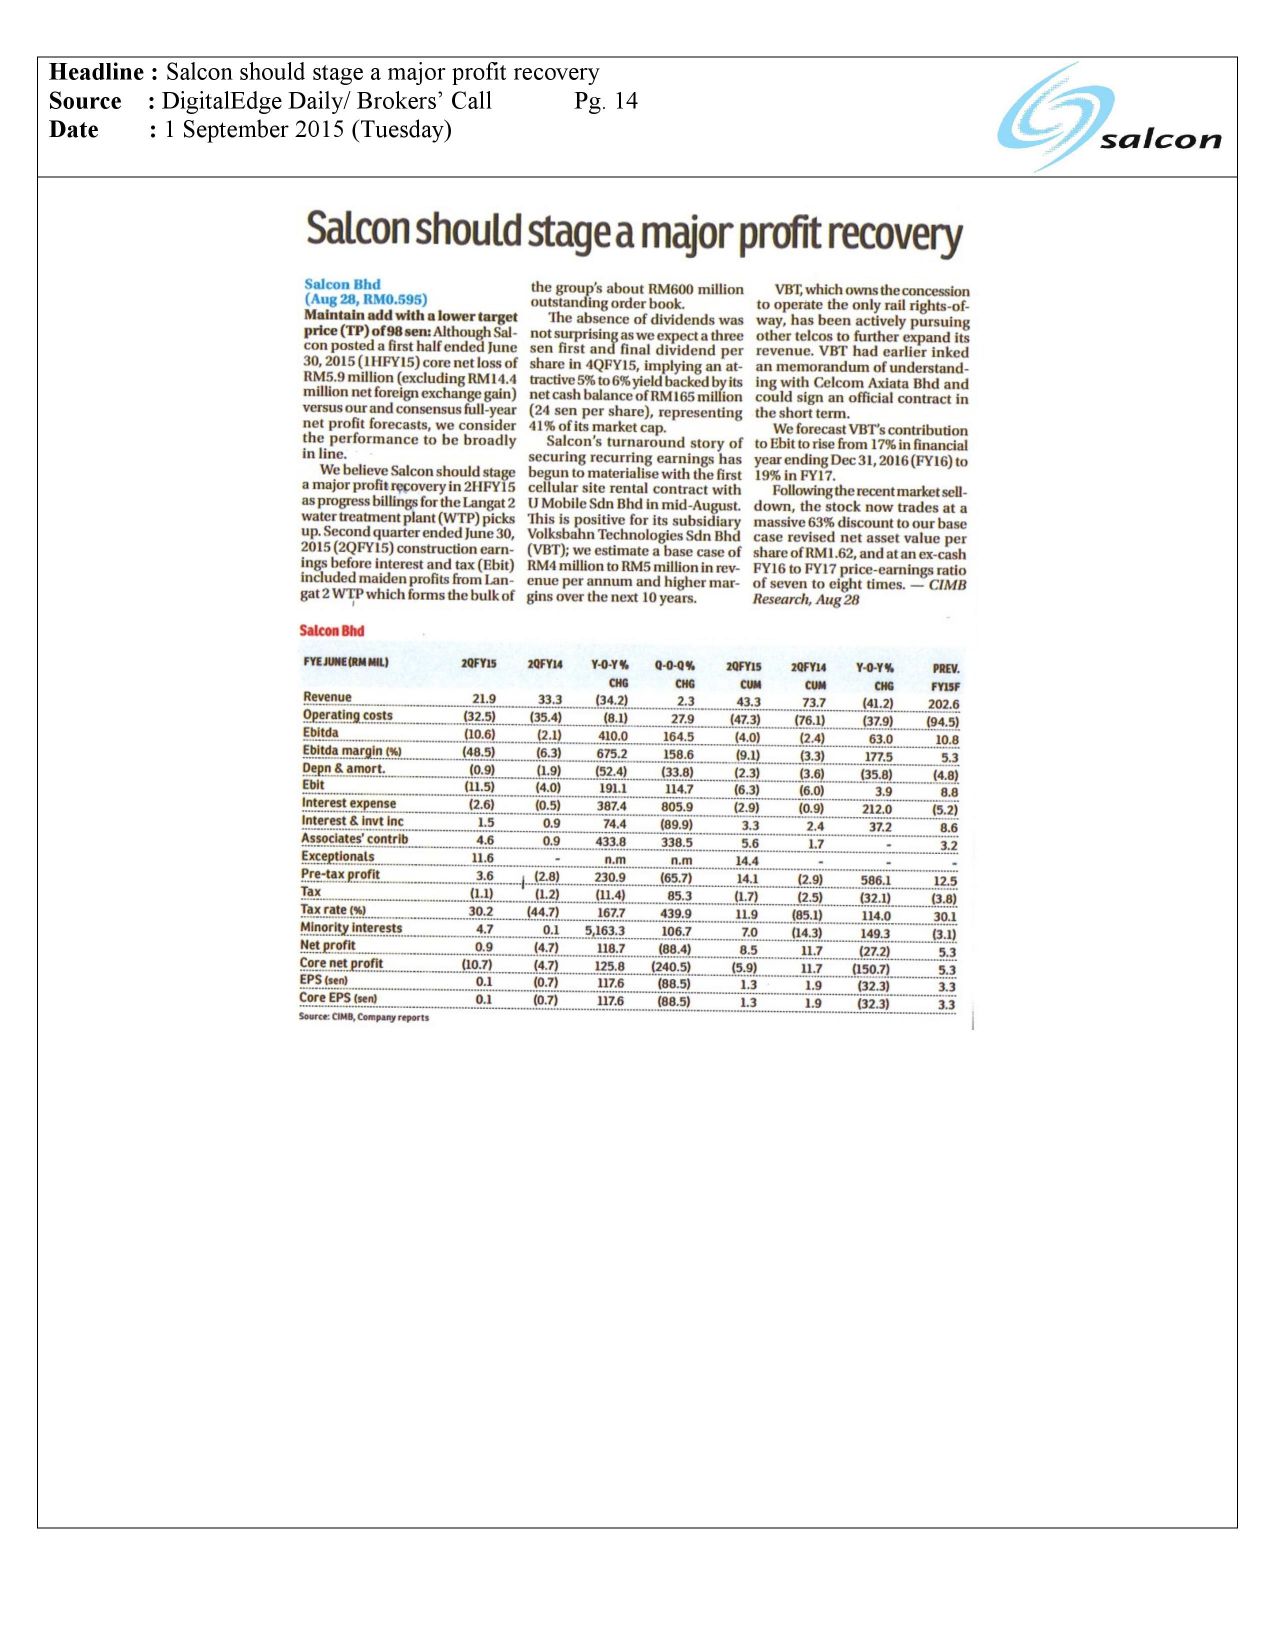 Salcon should stage a major profit recovery